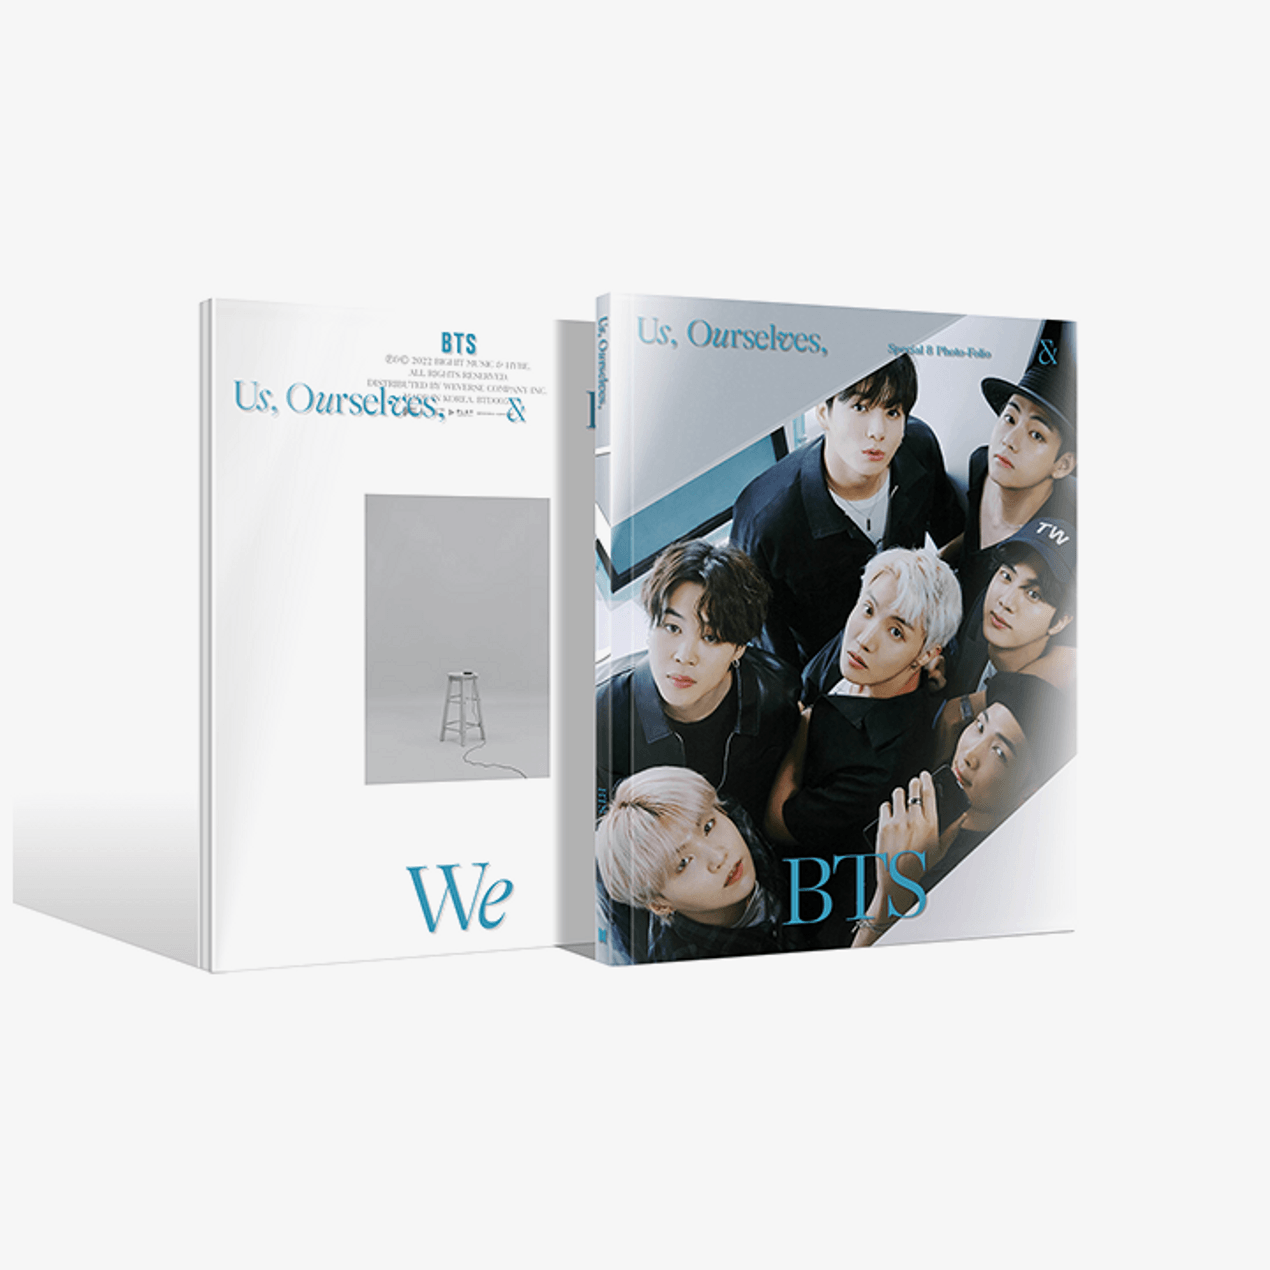 BTS Special 8 Photo-Folio Us, Ourselves and BTS "WE"